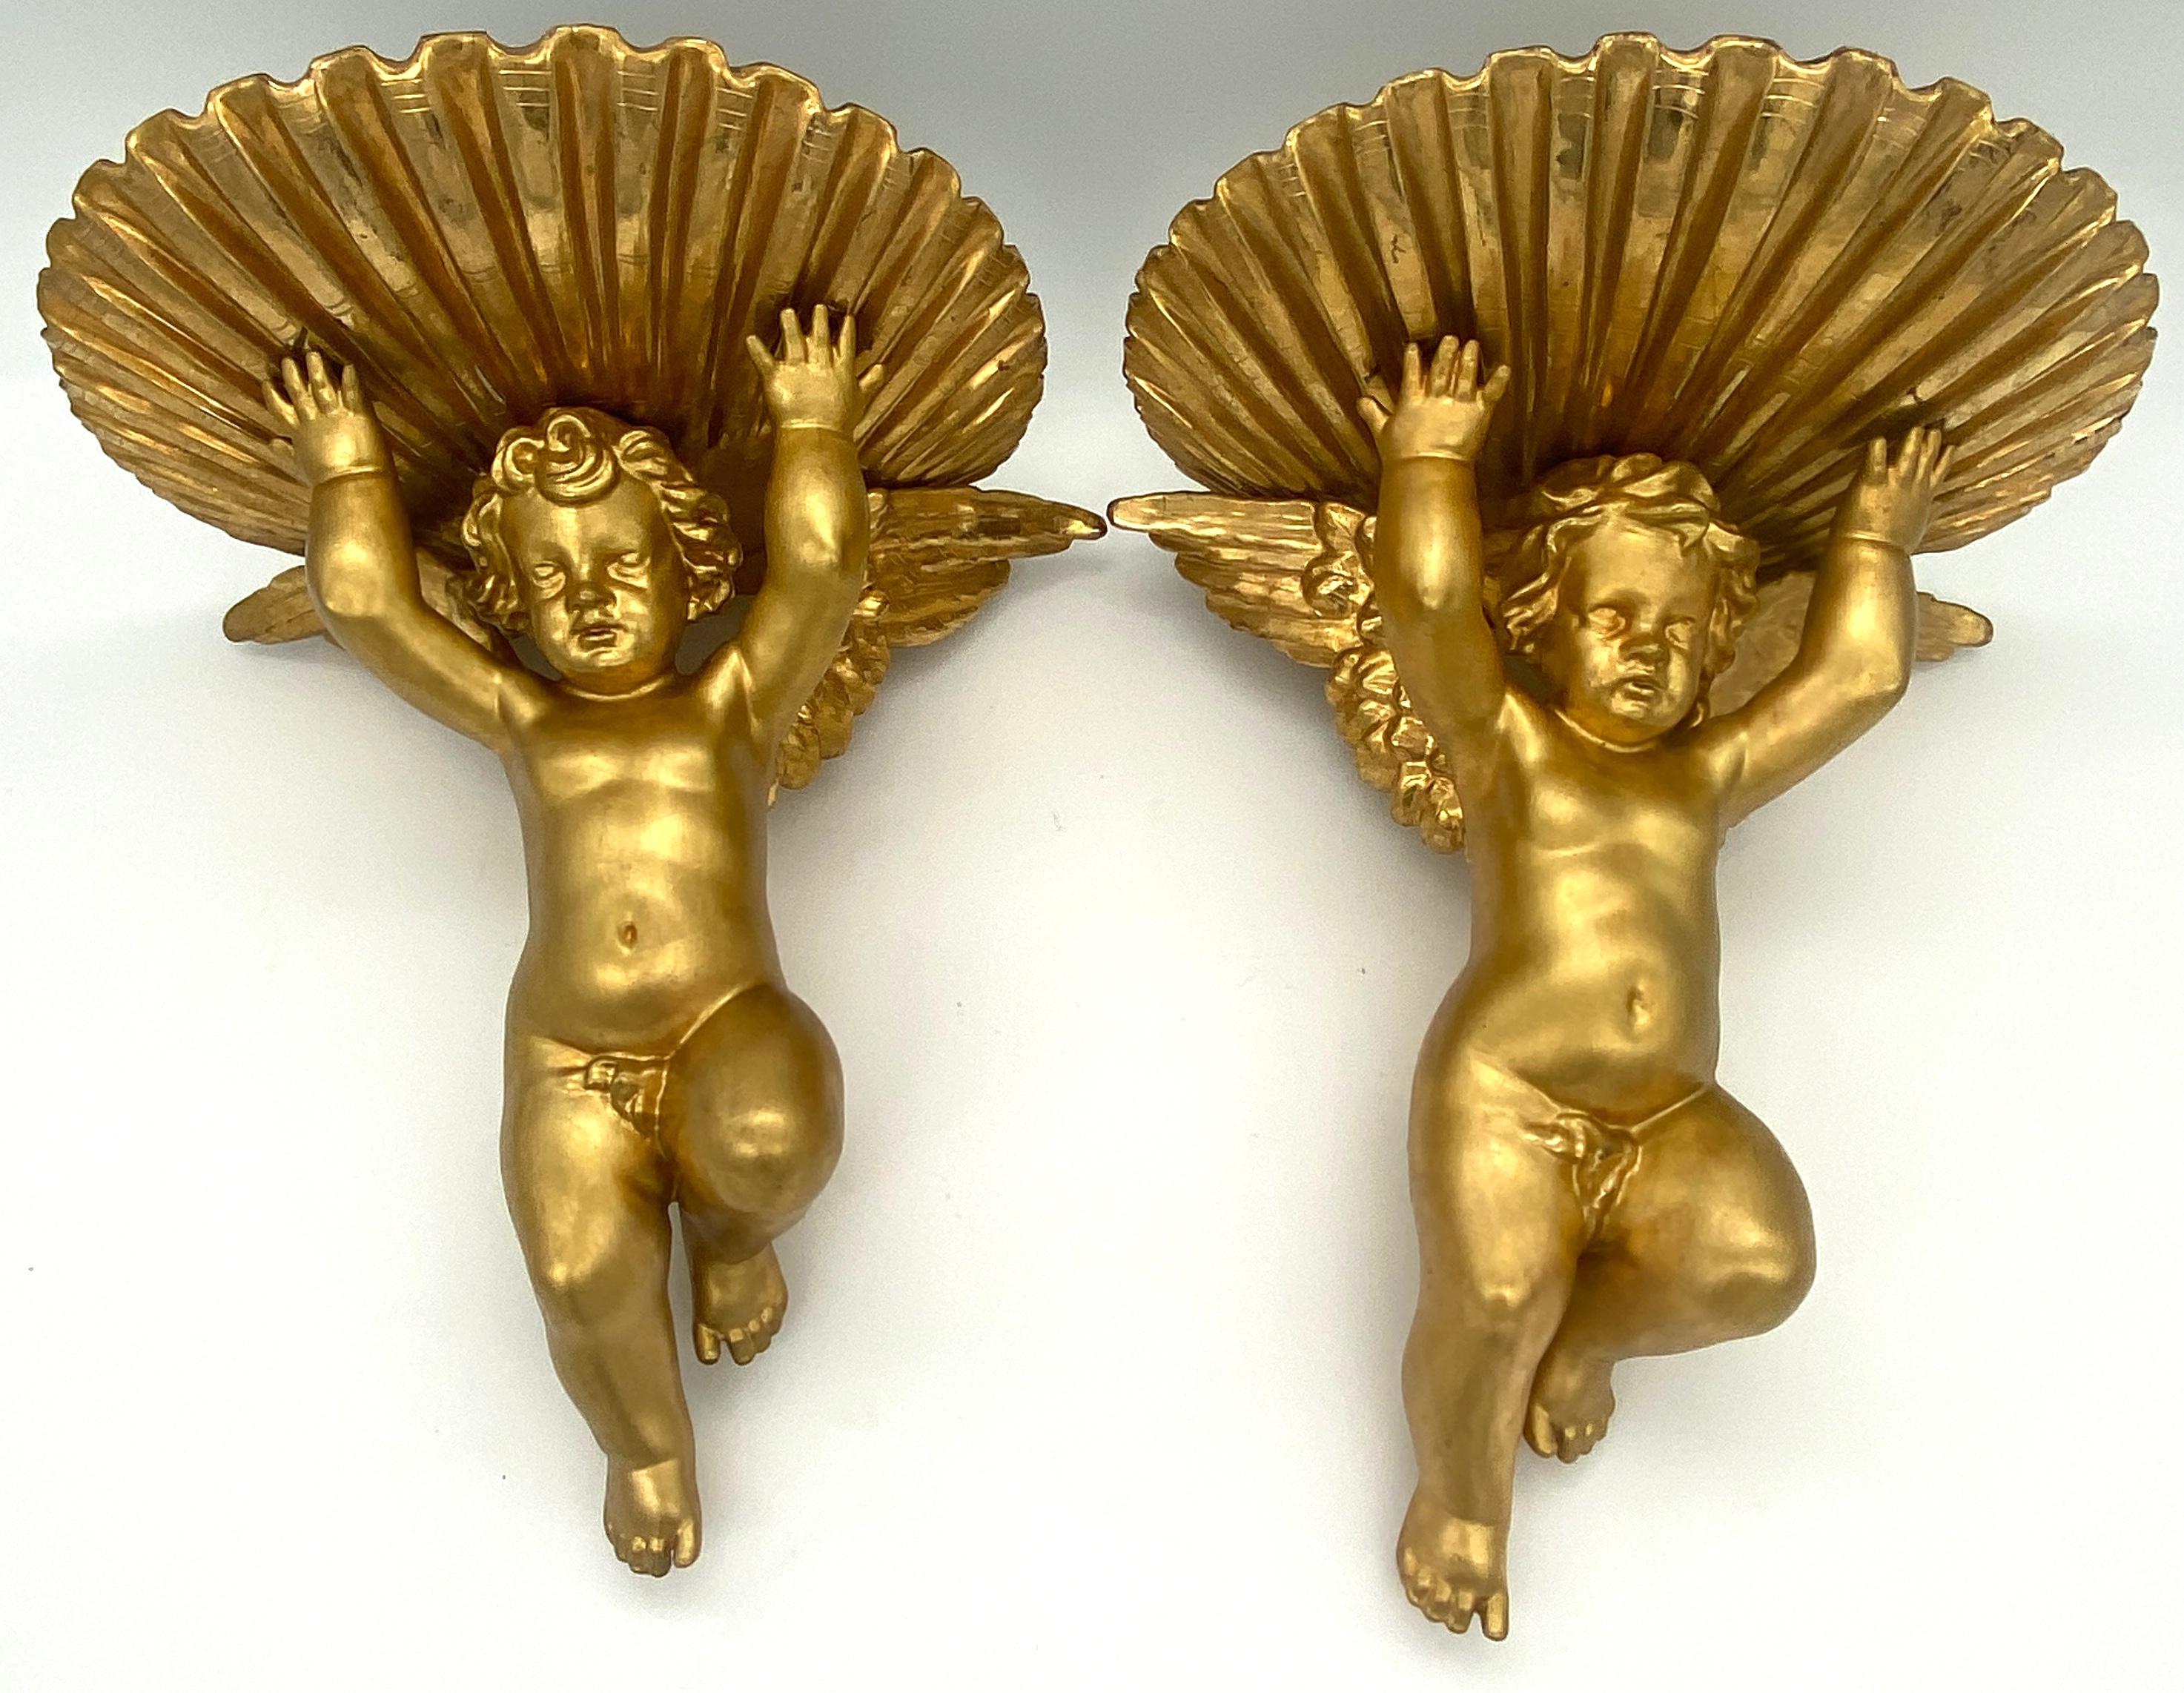 Pair of 19th Century Italian Grotto Carved Giltwood Putti & Shell Wall Brackets
Italy, Circa 1850s

An exquisite pair of 19th Century Italian Grotto Carved Giltwood Putti & Shell Wall Brackets, originating from Italy in the 1850s. These captivating